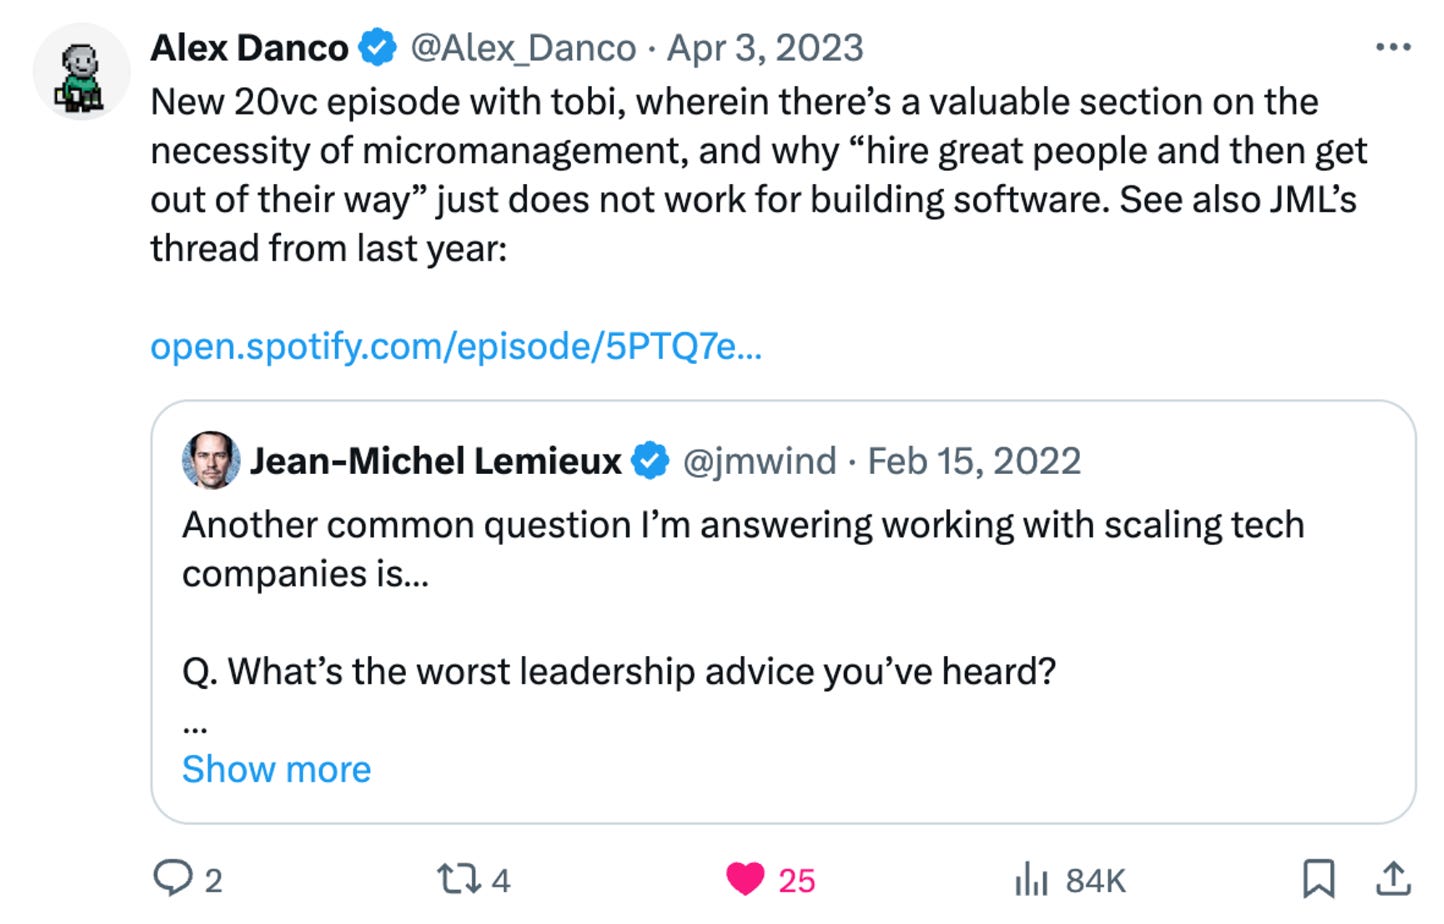 Tweet from @Alex_Danco with a link to a 20VC interview with Tobi Lutke (Shopify CEO) and the following comment: "New 20vc episode with tobi, wherein there’s a valuable section on the necessity of micromanagement, and why “hire great people and then get out of their way” just does not work for building software."